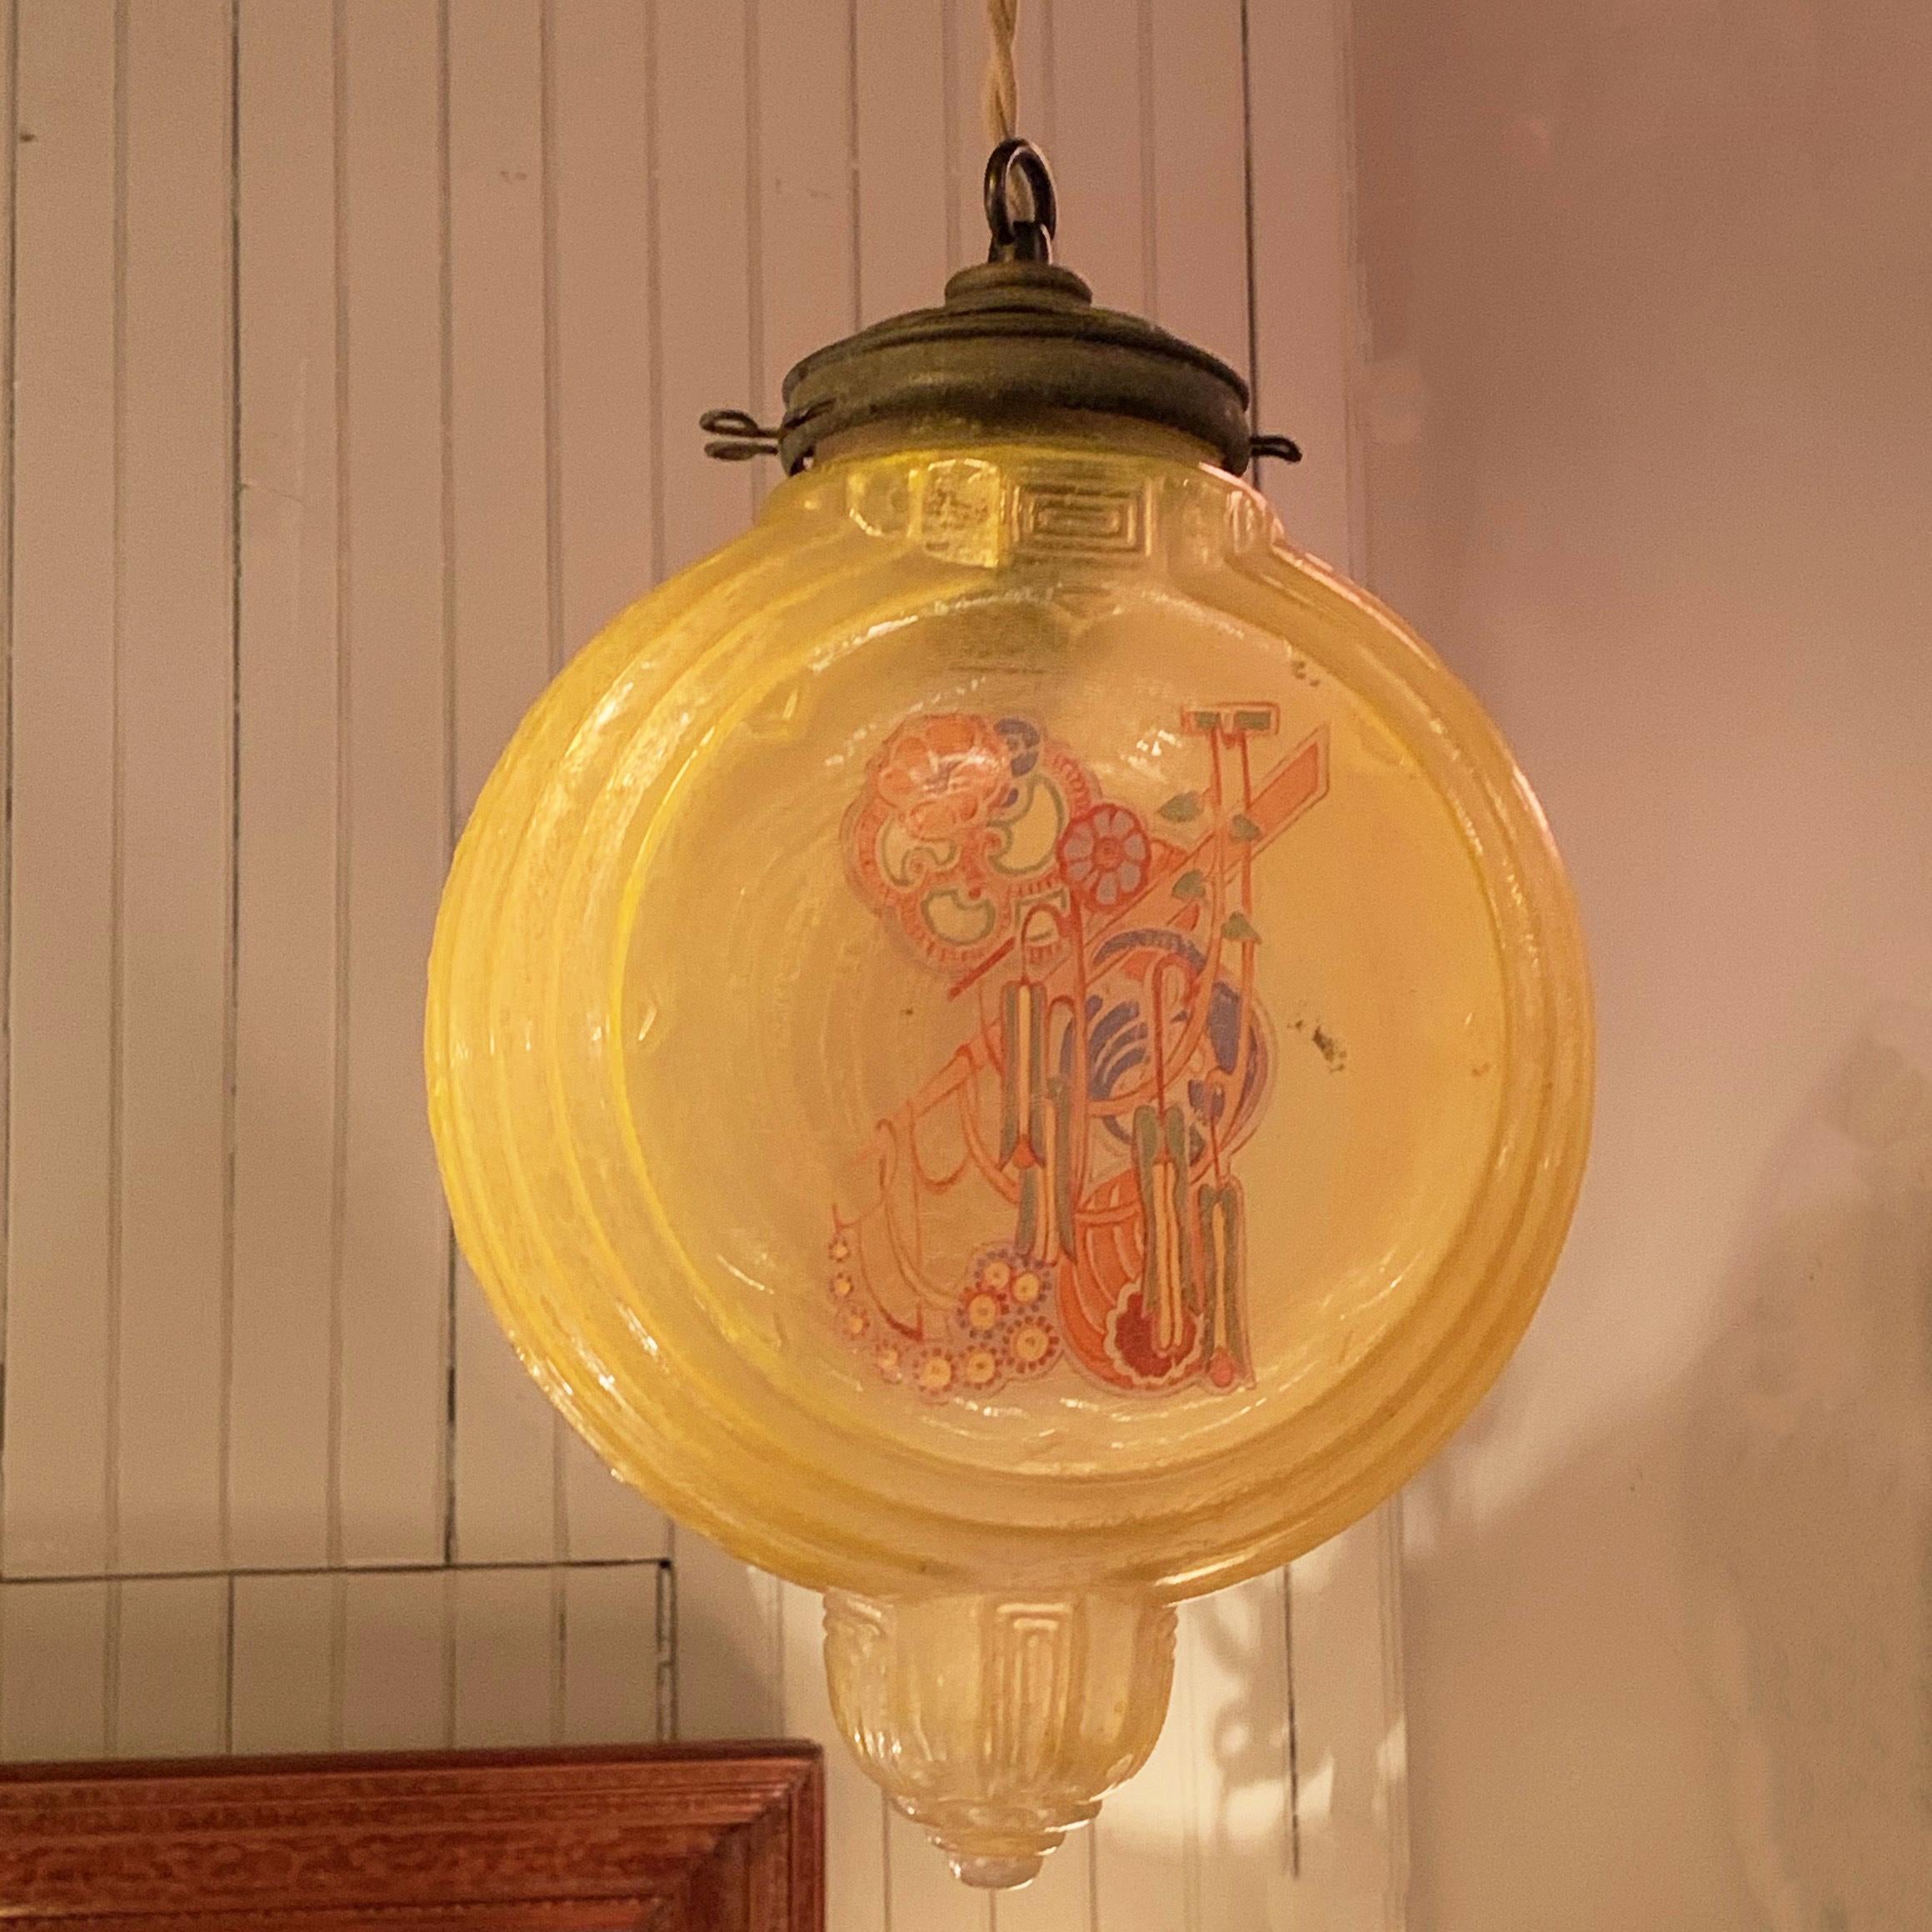 Art Deco pendant light features a molded, crackled, amber glass shade with painted chinoiserie design on both sides with brass fitter and canopy. The pendant is wired with 50 inches of braided beige cloth cord to accept up to a 100 watt bulb.